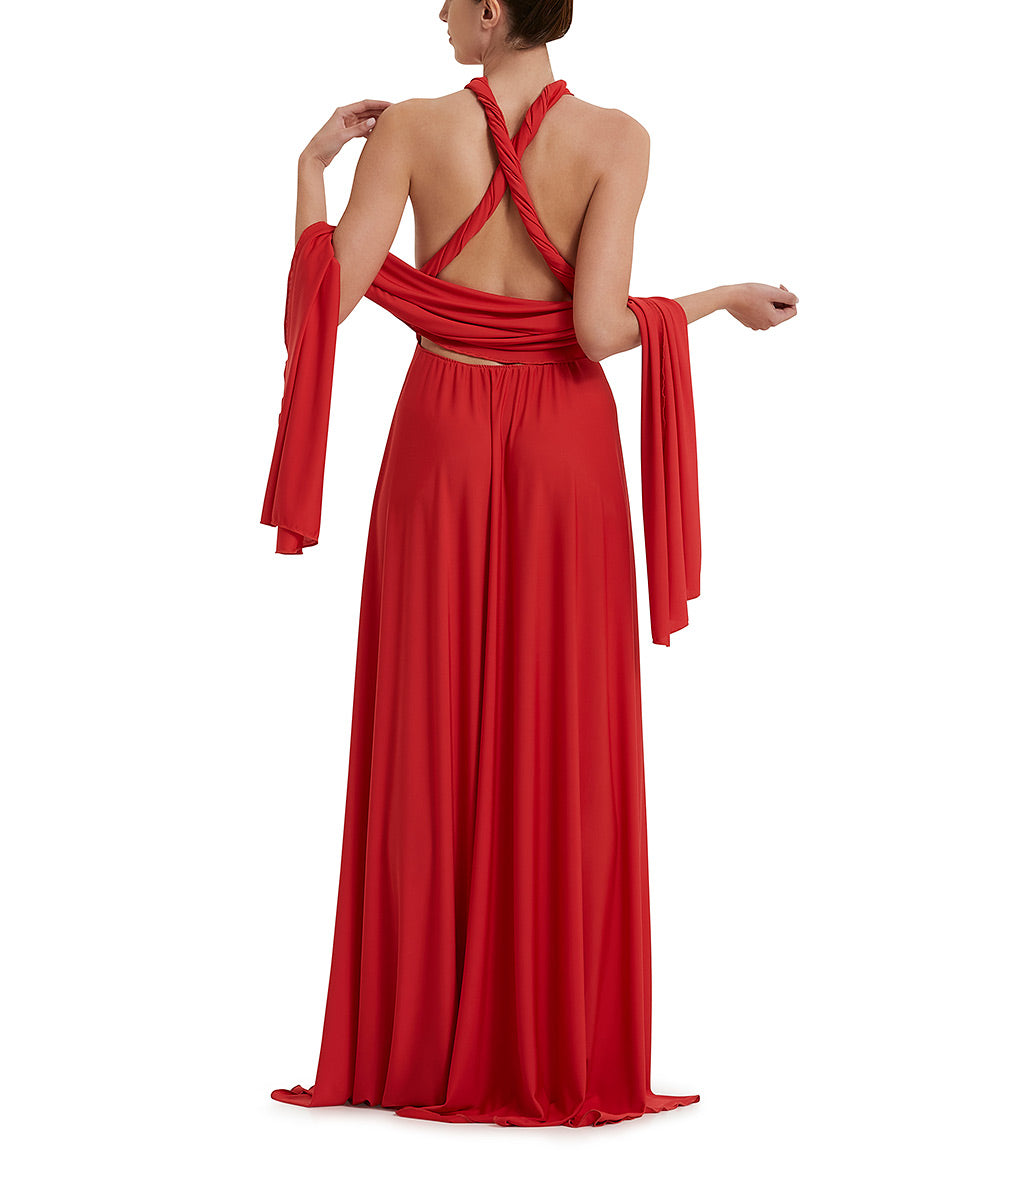 Red party dress